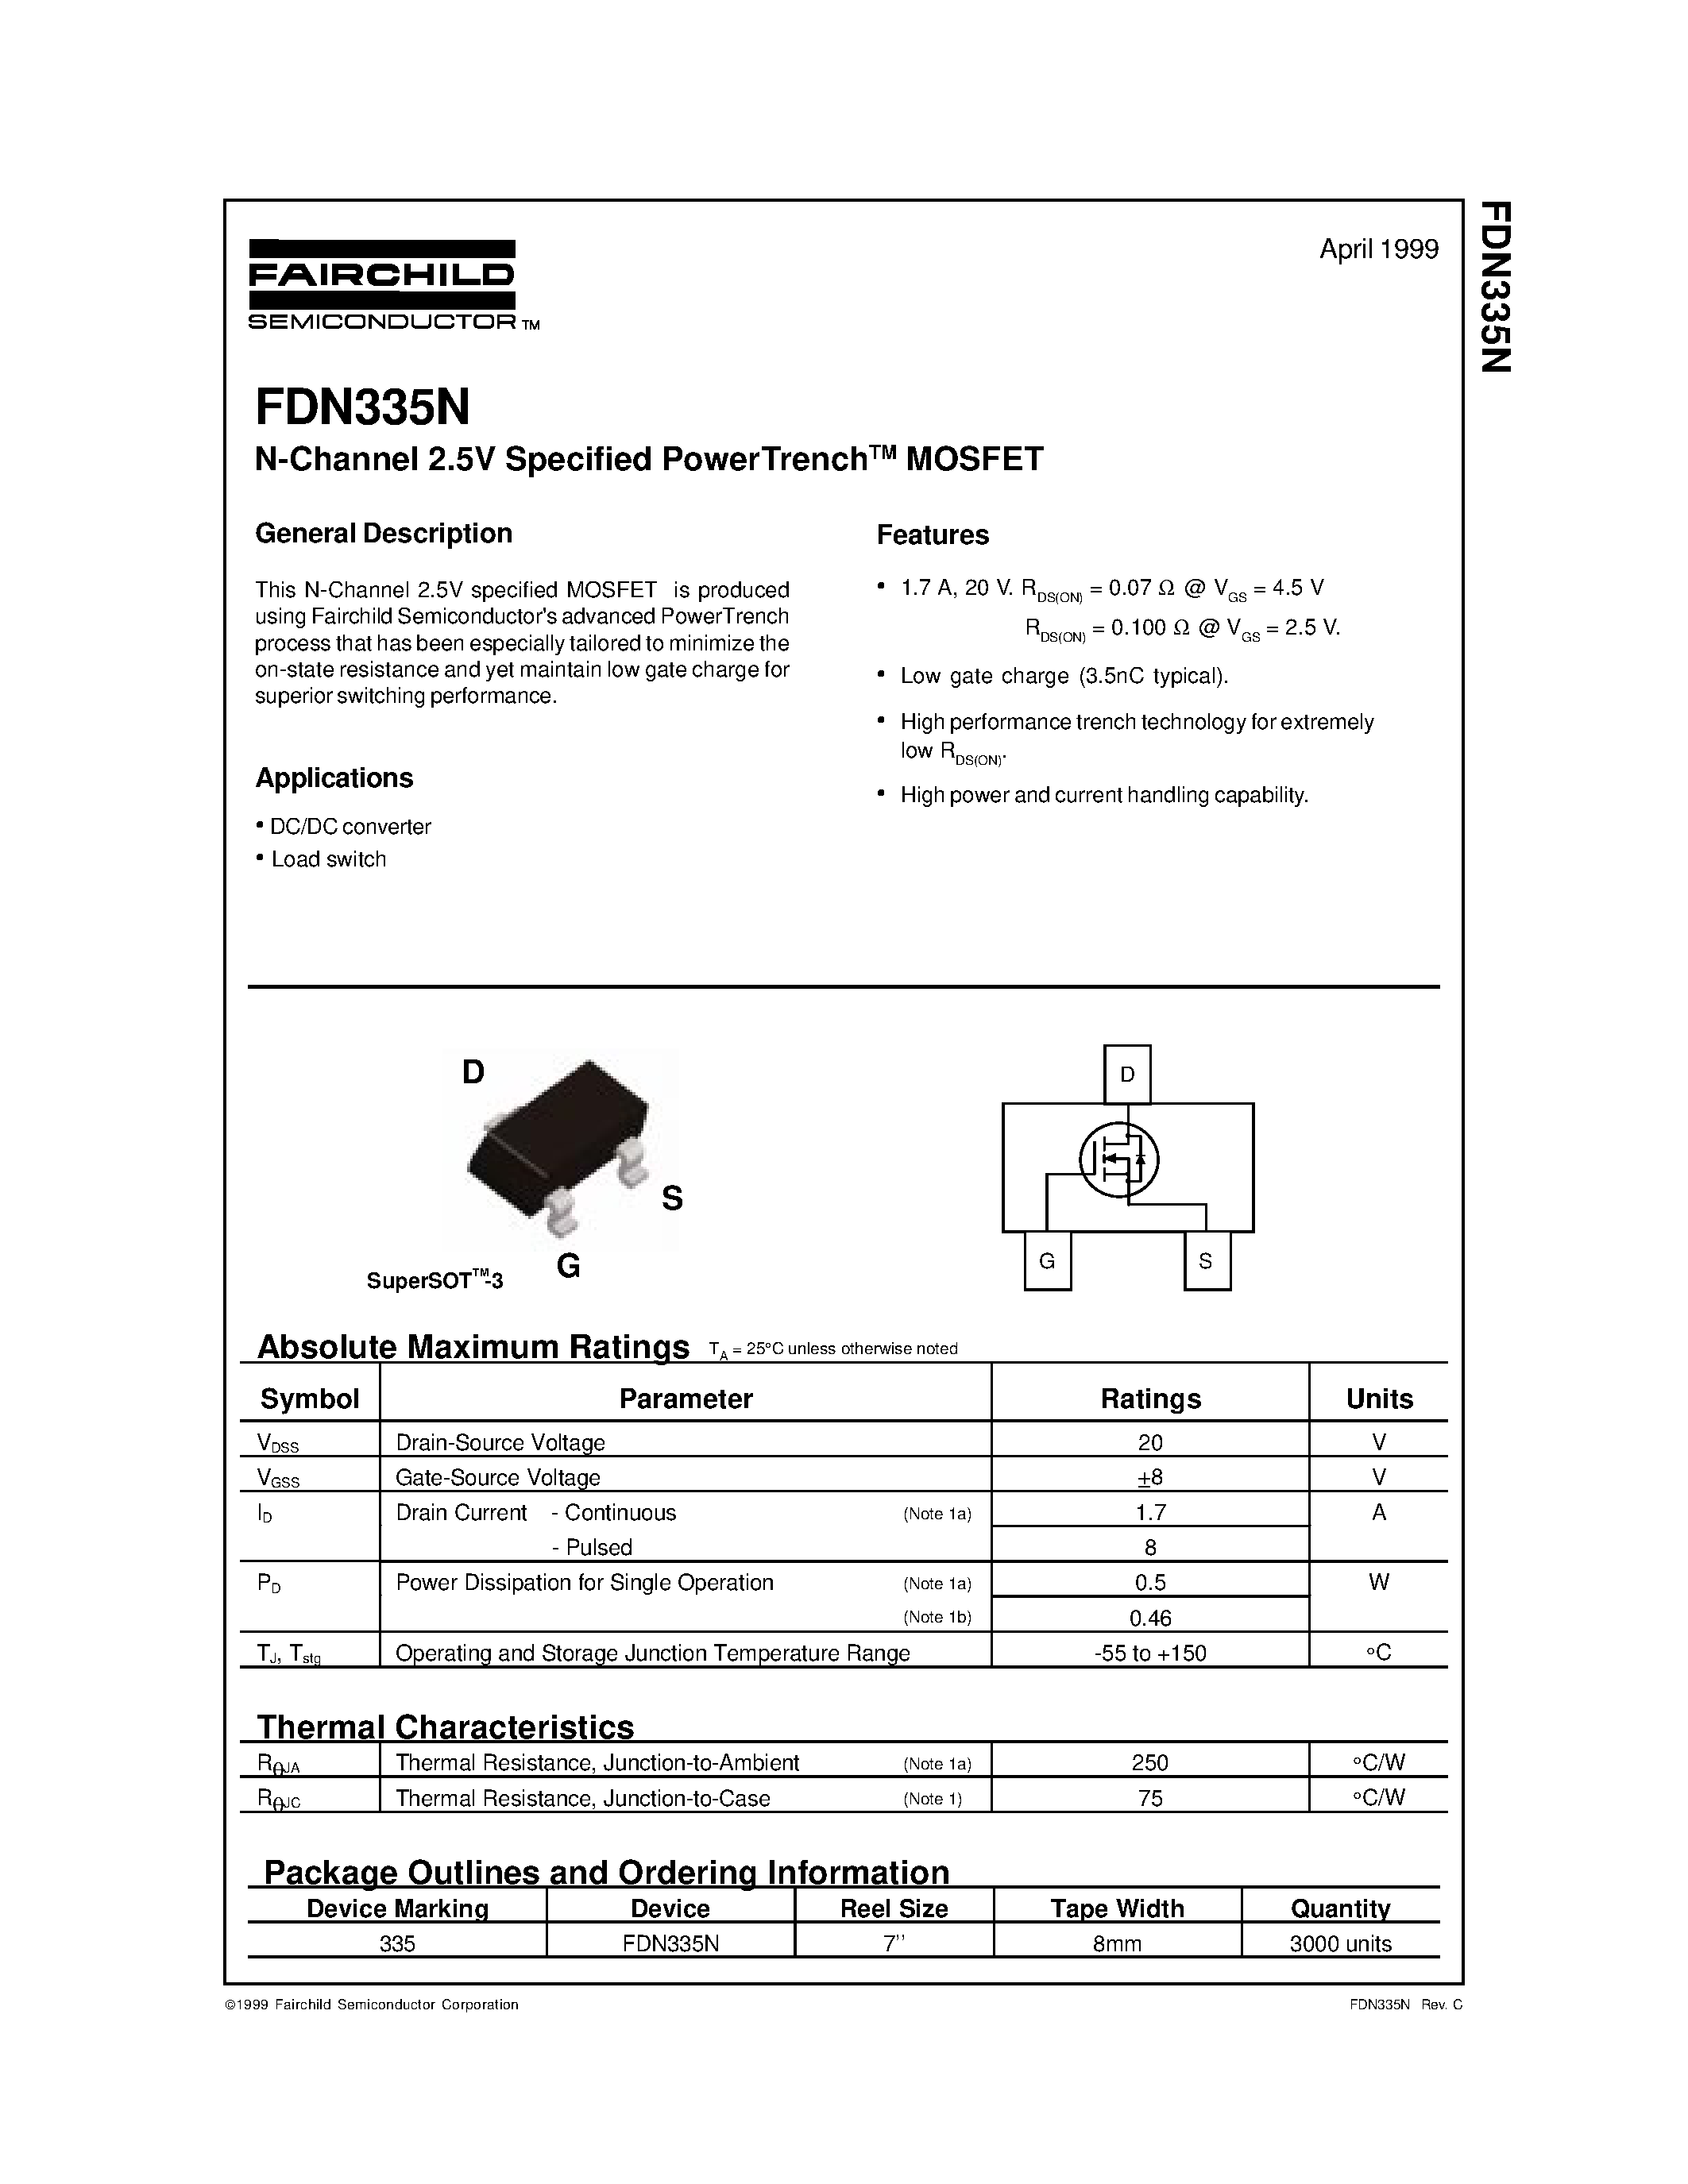 Datasheet FDN335N - N-Channel 2.5V Specified PowerTrenchTM MOSFET page 1